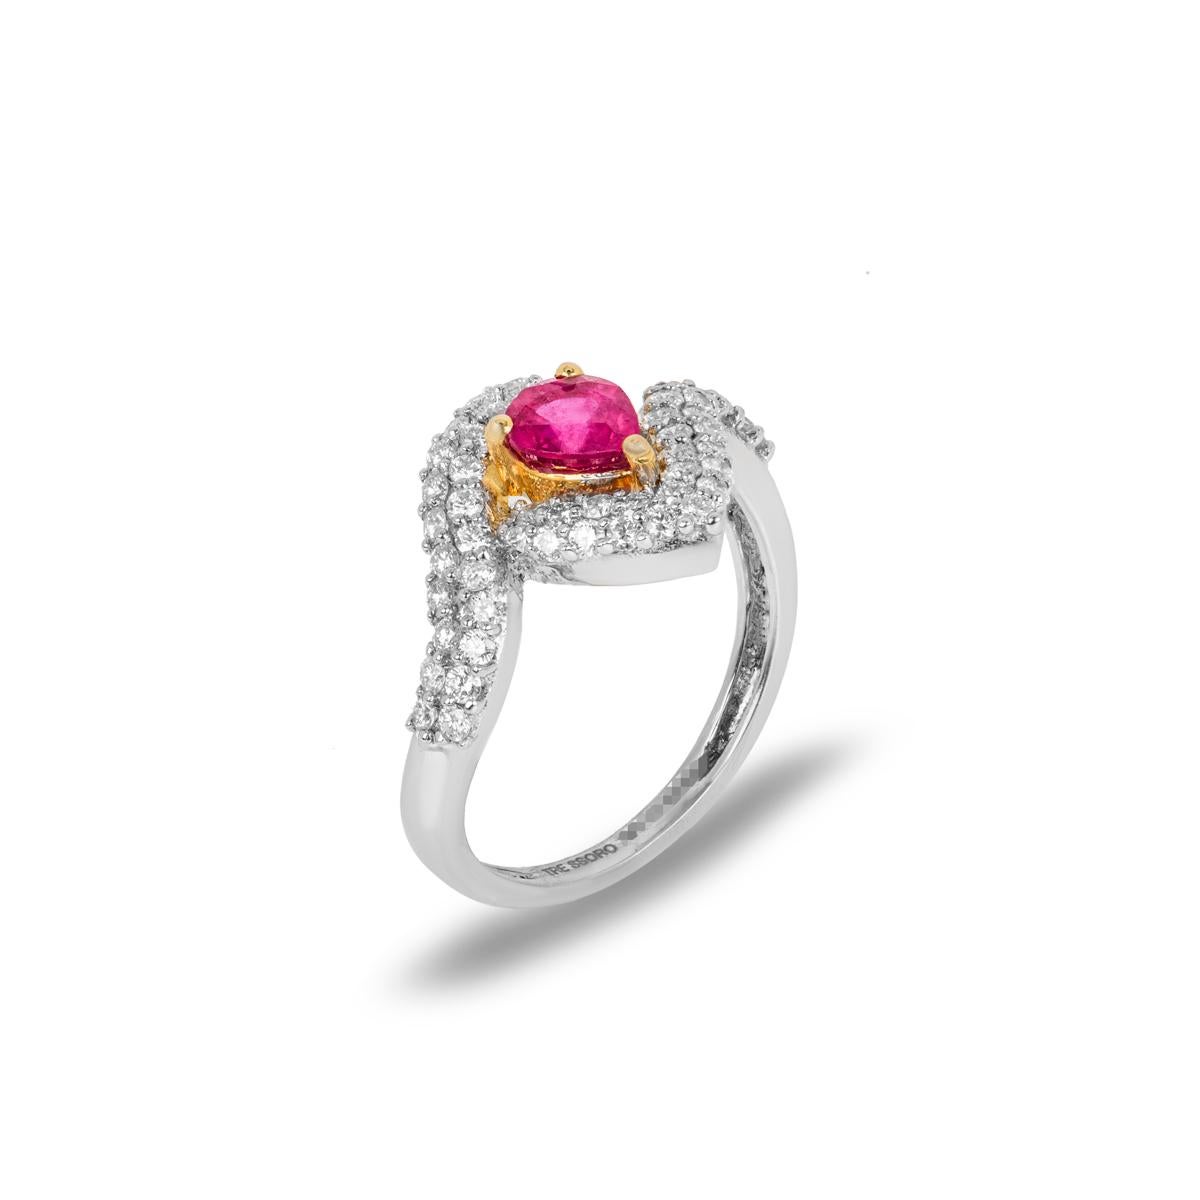 A stunning 18k white gold ruby and diamond dress ring. The ring is set to the centre with a pear cut ruby weighing 0.85ct which exhibits an even rich colour. The ruby is enclosed by 2 rows of round brilliant cut diamonds featuring a twist design,